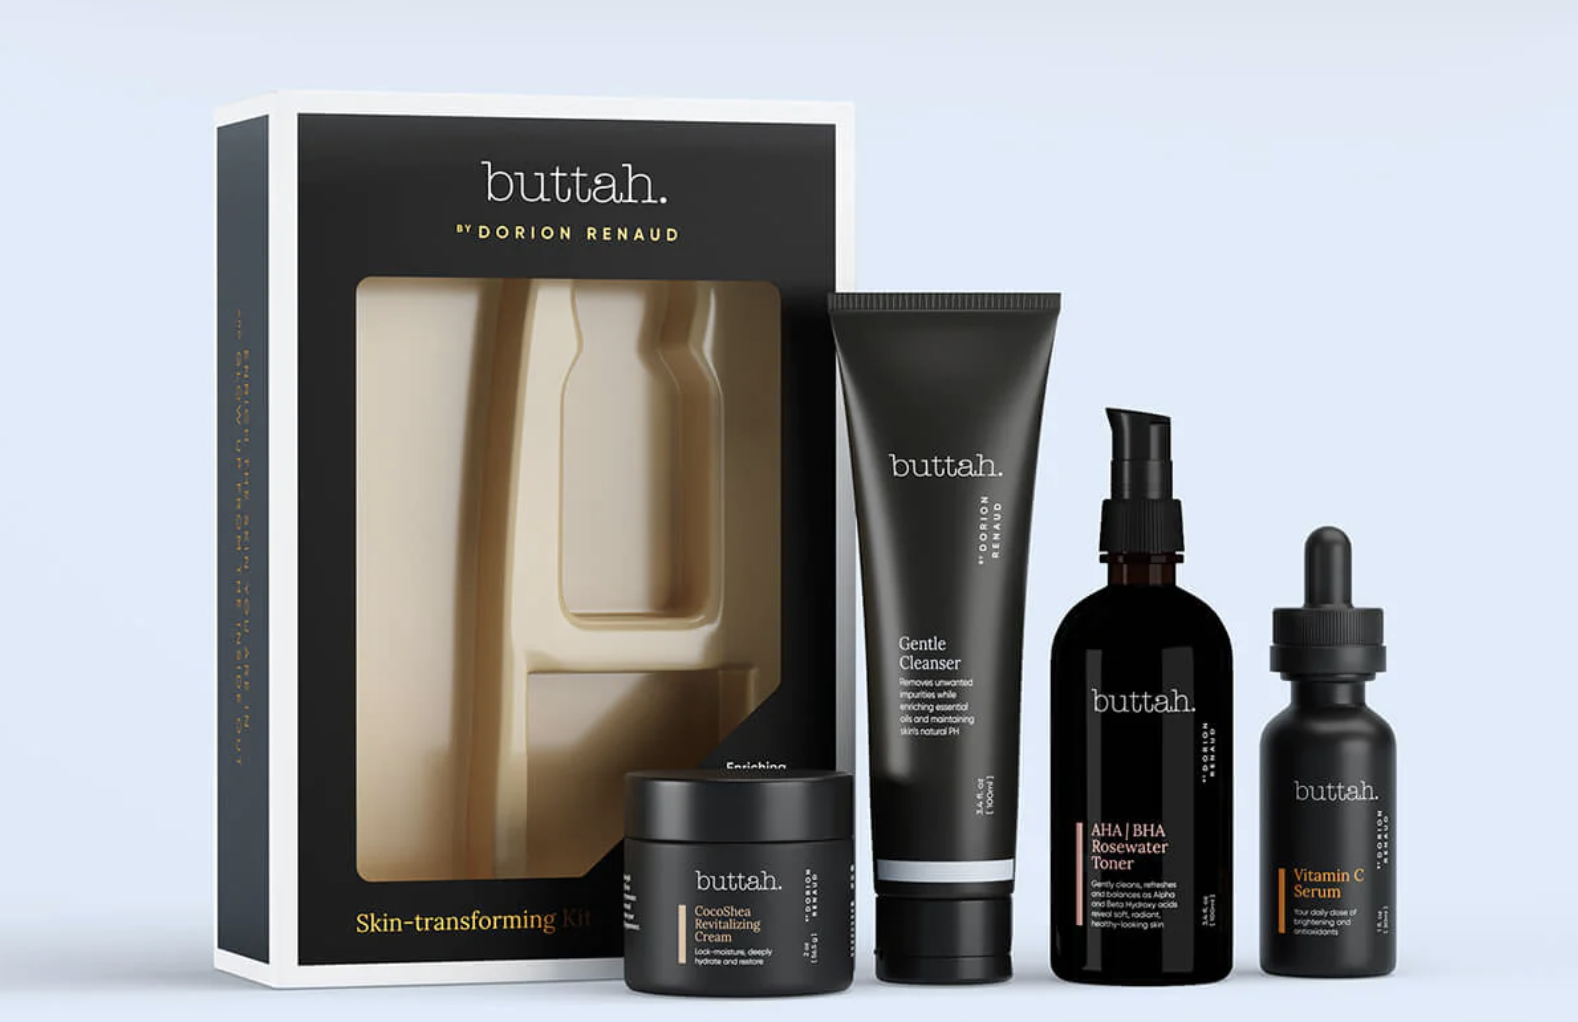 For All-In-One Skincare: Buttah Skin Transforming Routine